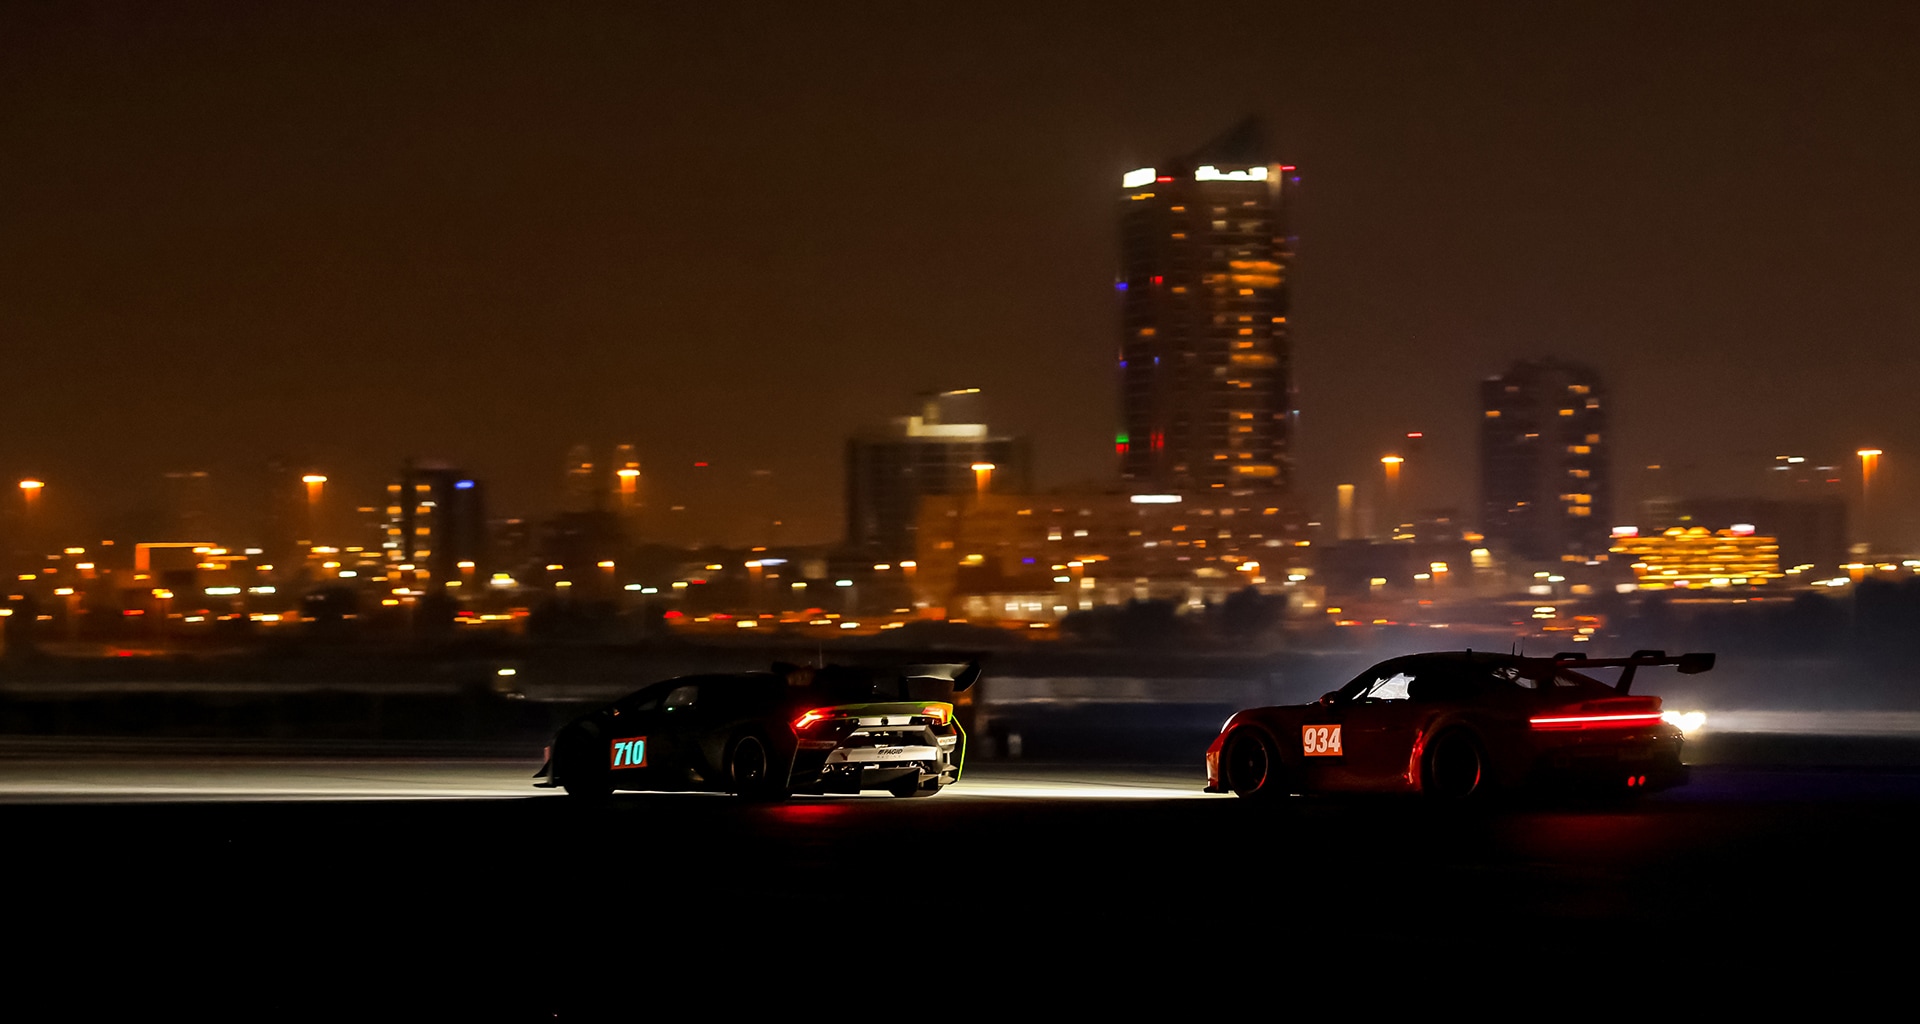 Hankook Tire & Technology-Technology in Motion-Dubai 24 Hour Race, A dash to the finish-6